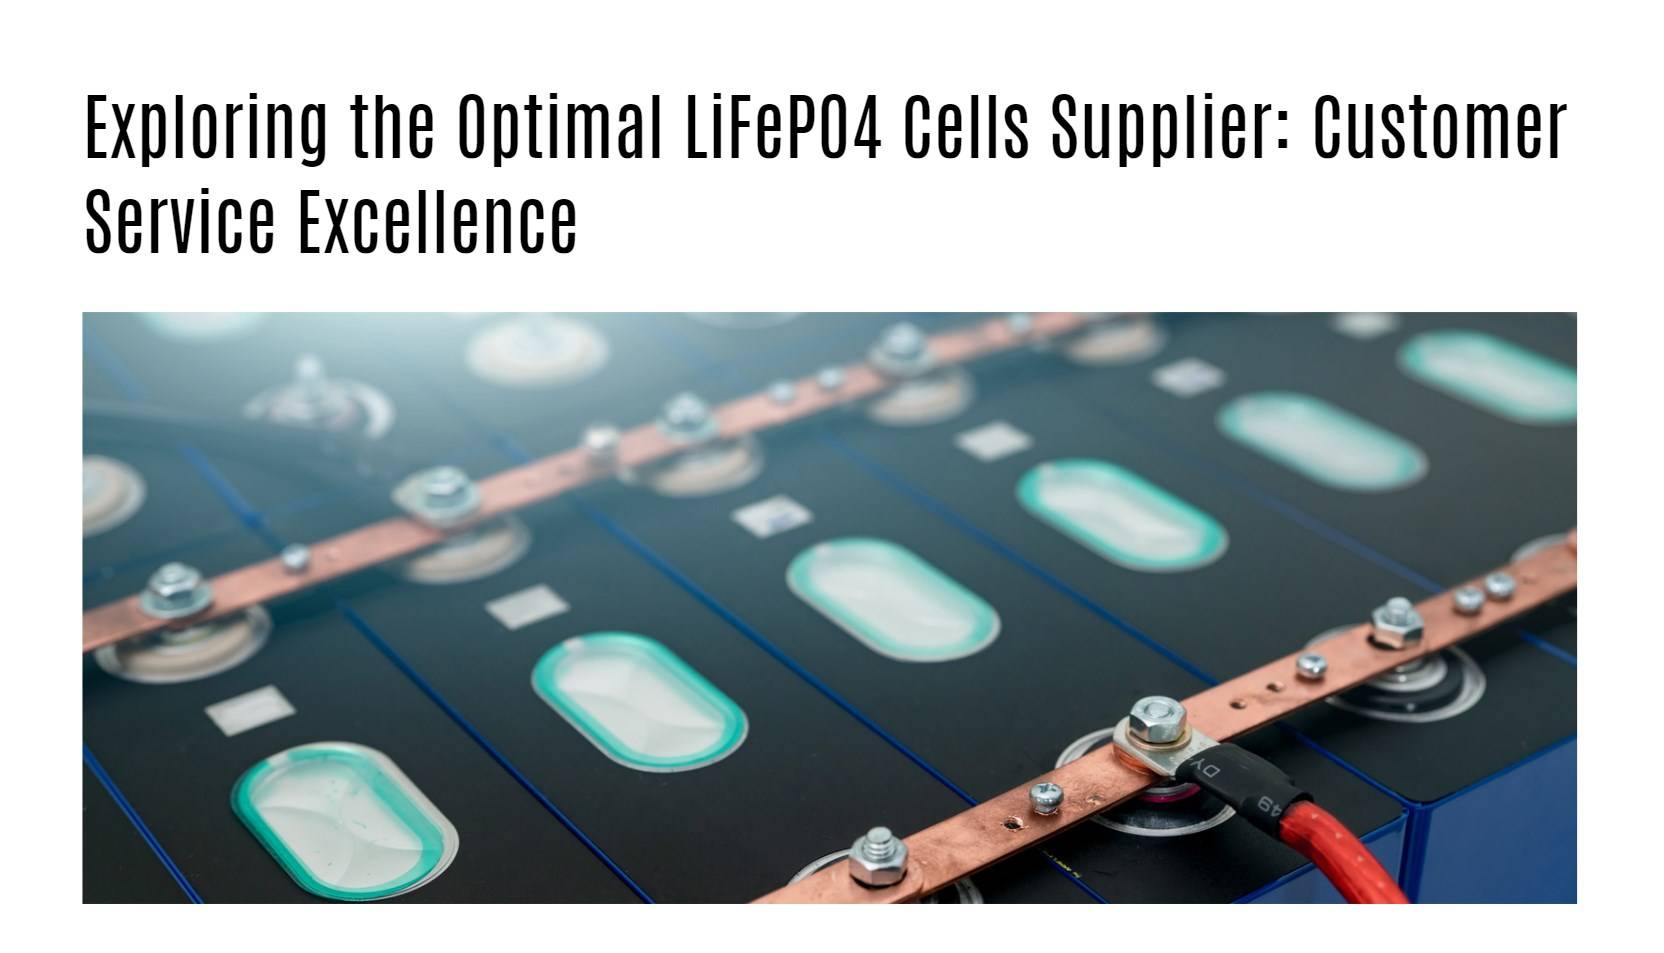 Exploring the Optimal LiFePO4 Cells Supplier: Customer Service Excellence